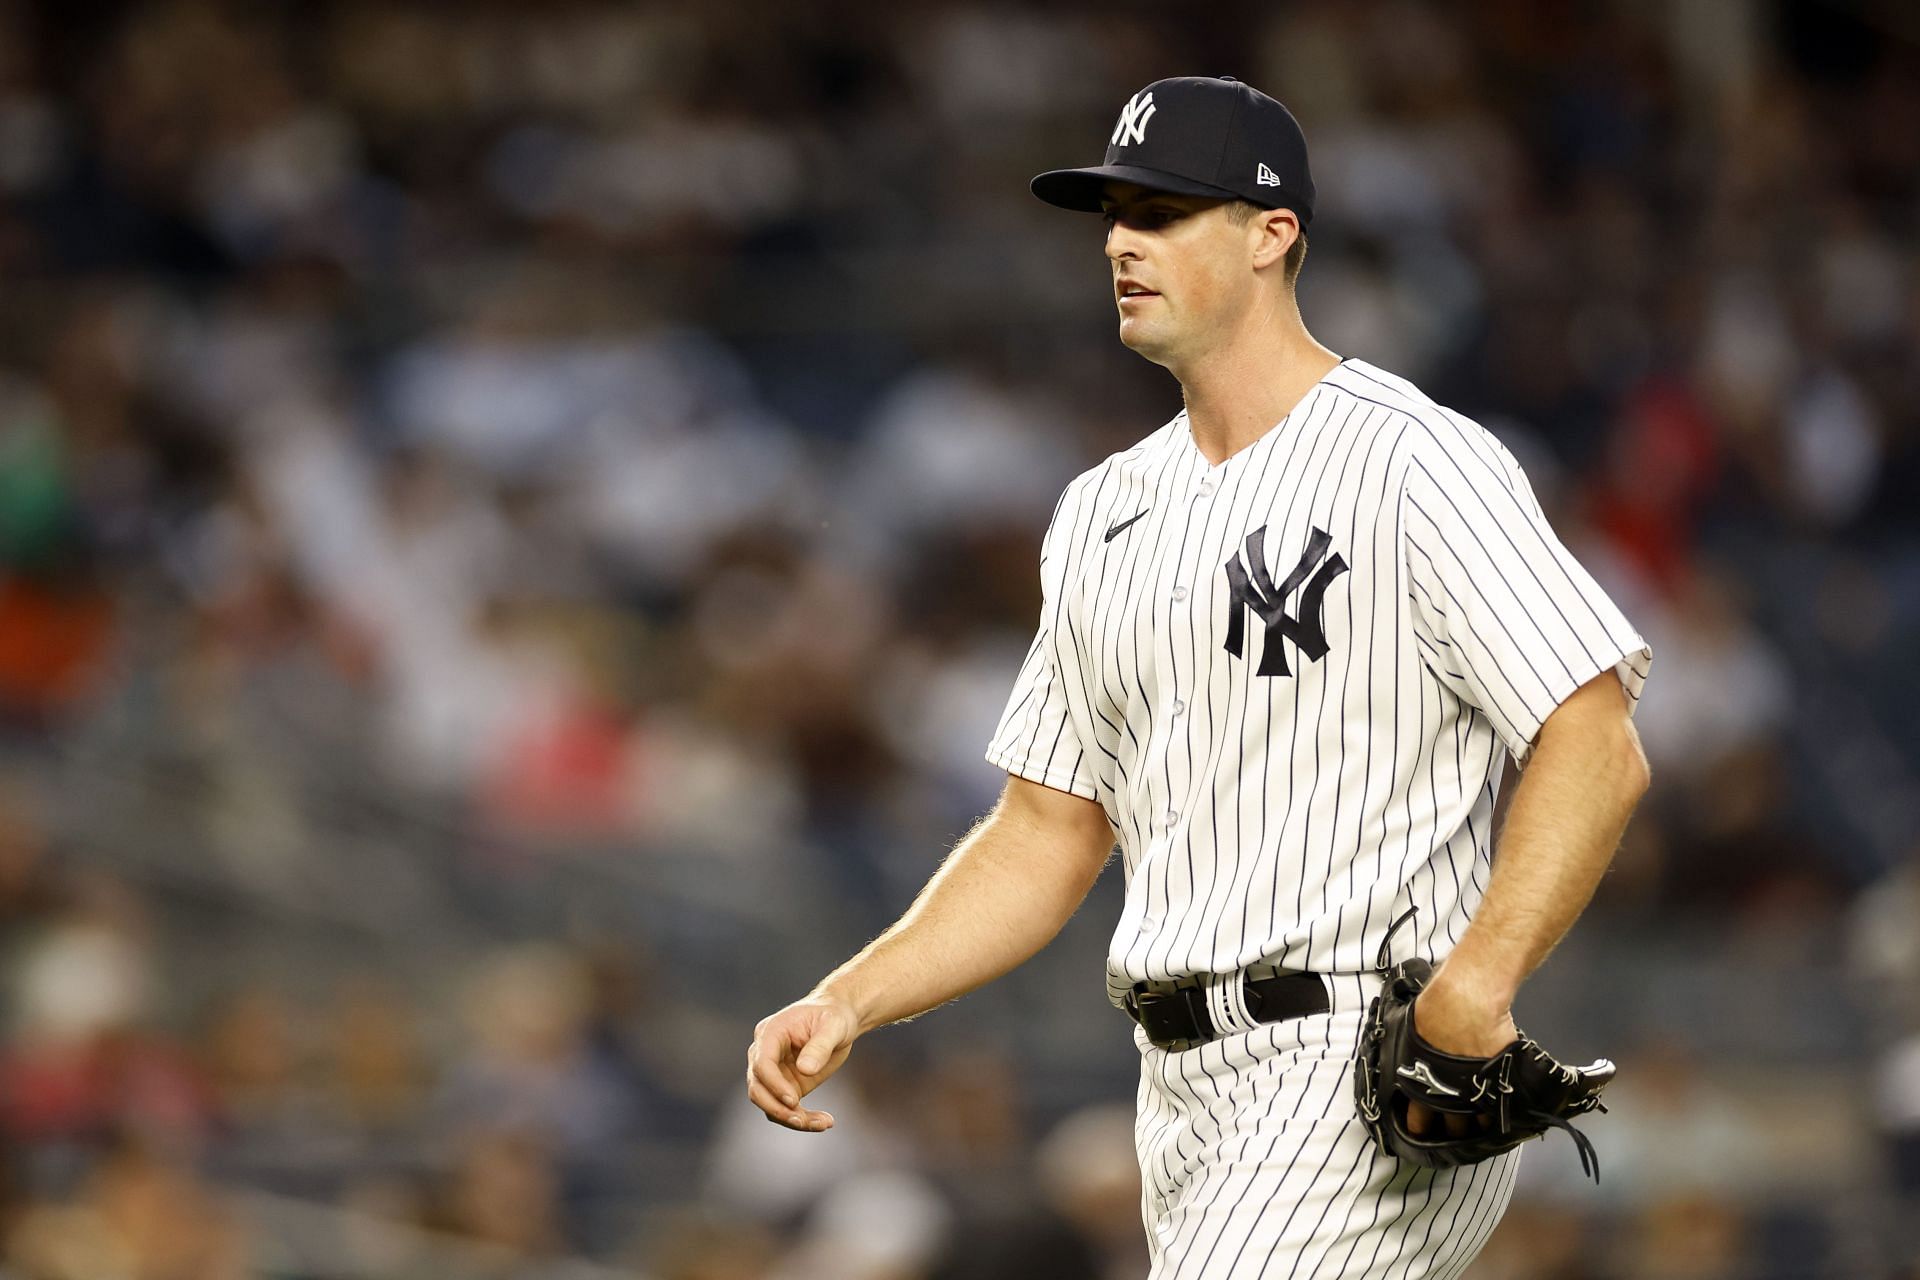 New York Yankees fans can't comprehend manager Aaron Boone's